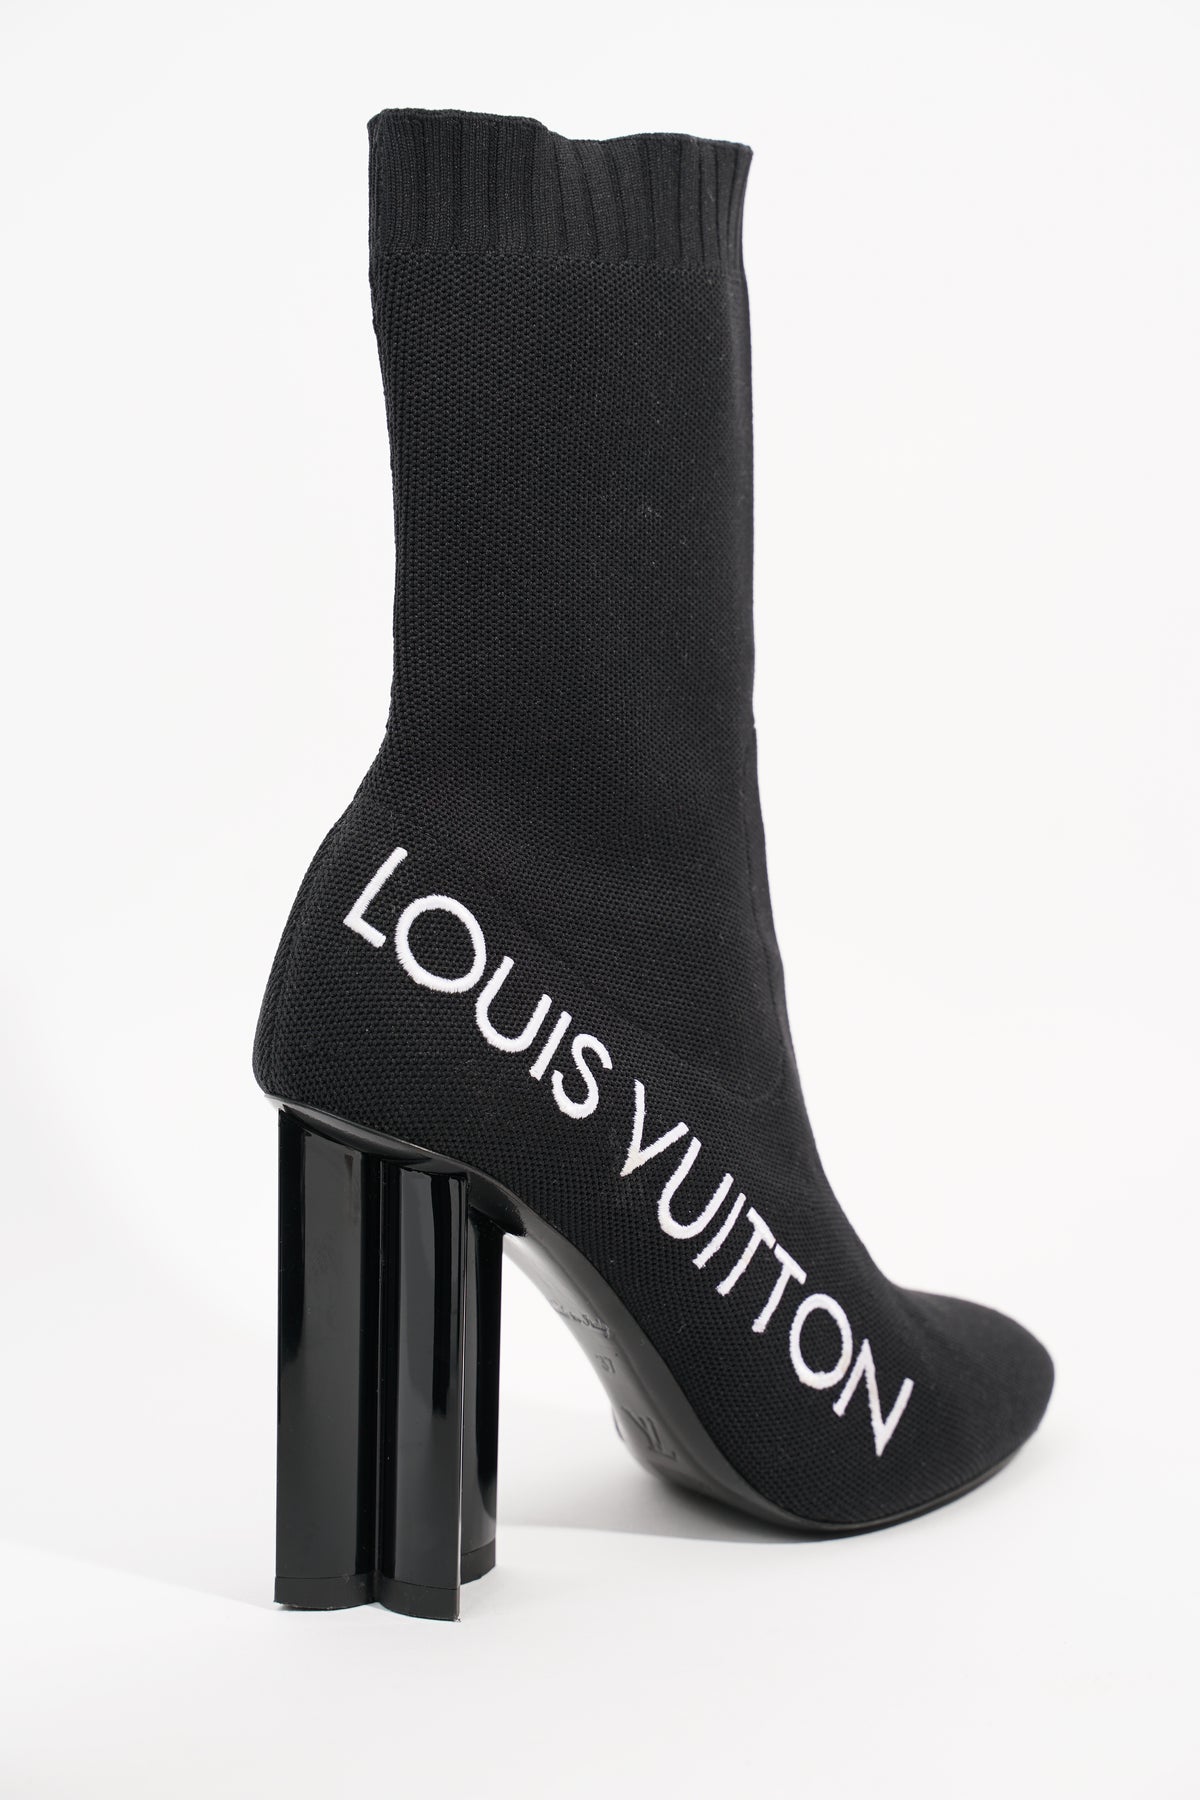 louis vuitton boots black and white